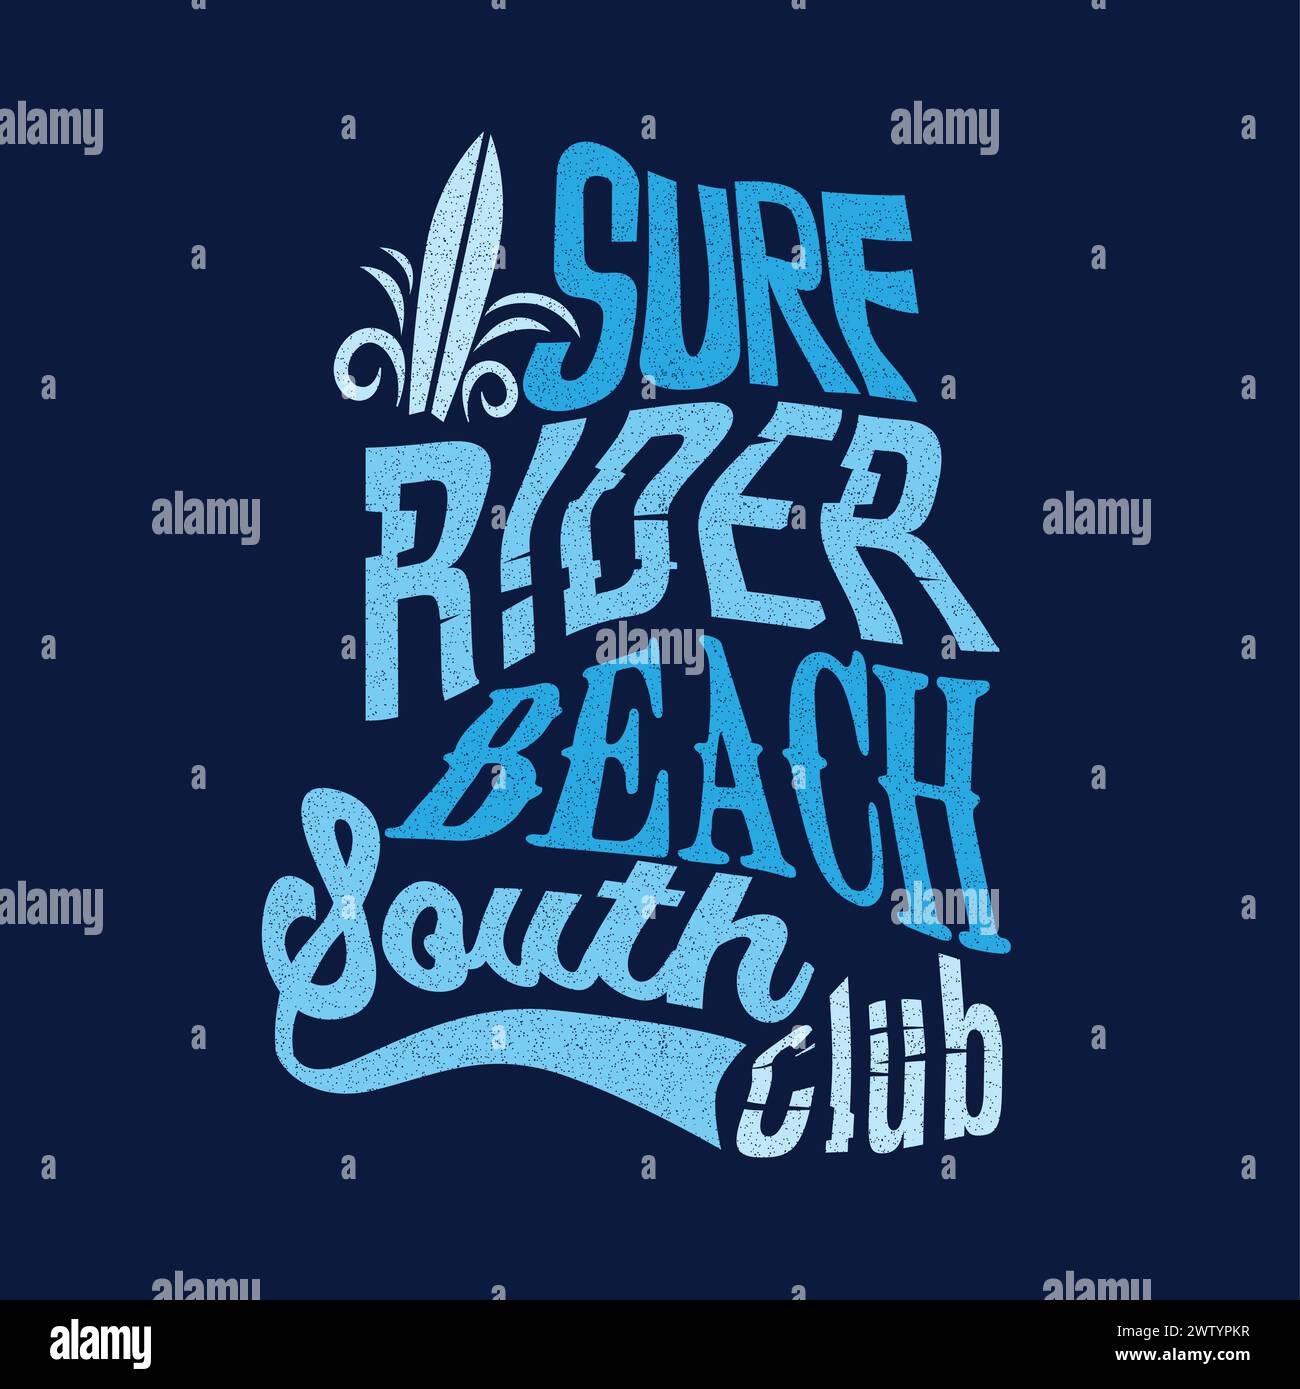 Surf Rider Typography surfing beach south club typographic poster Distressed t shirt print design vector Stock Vector